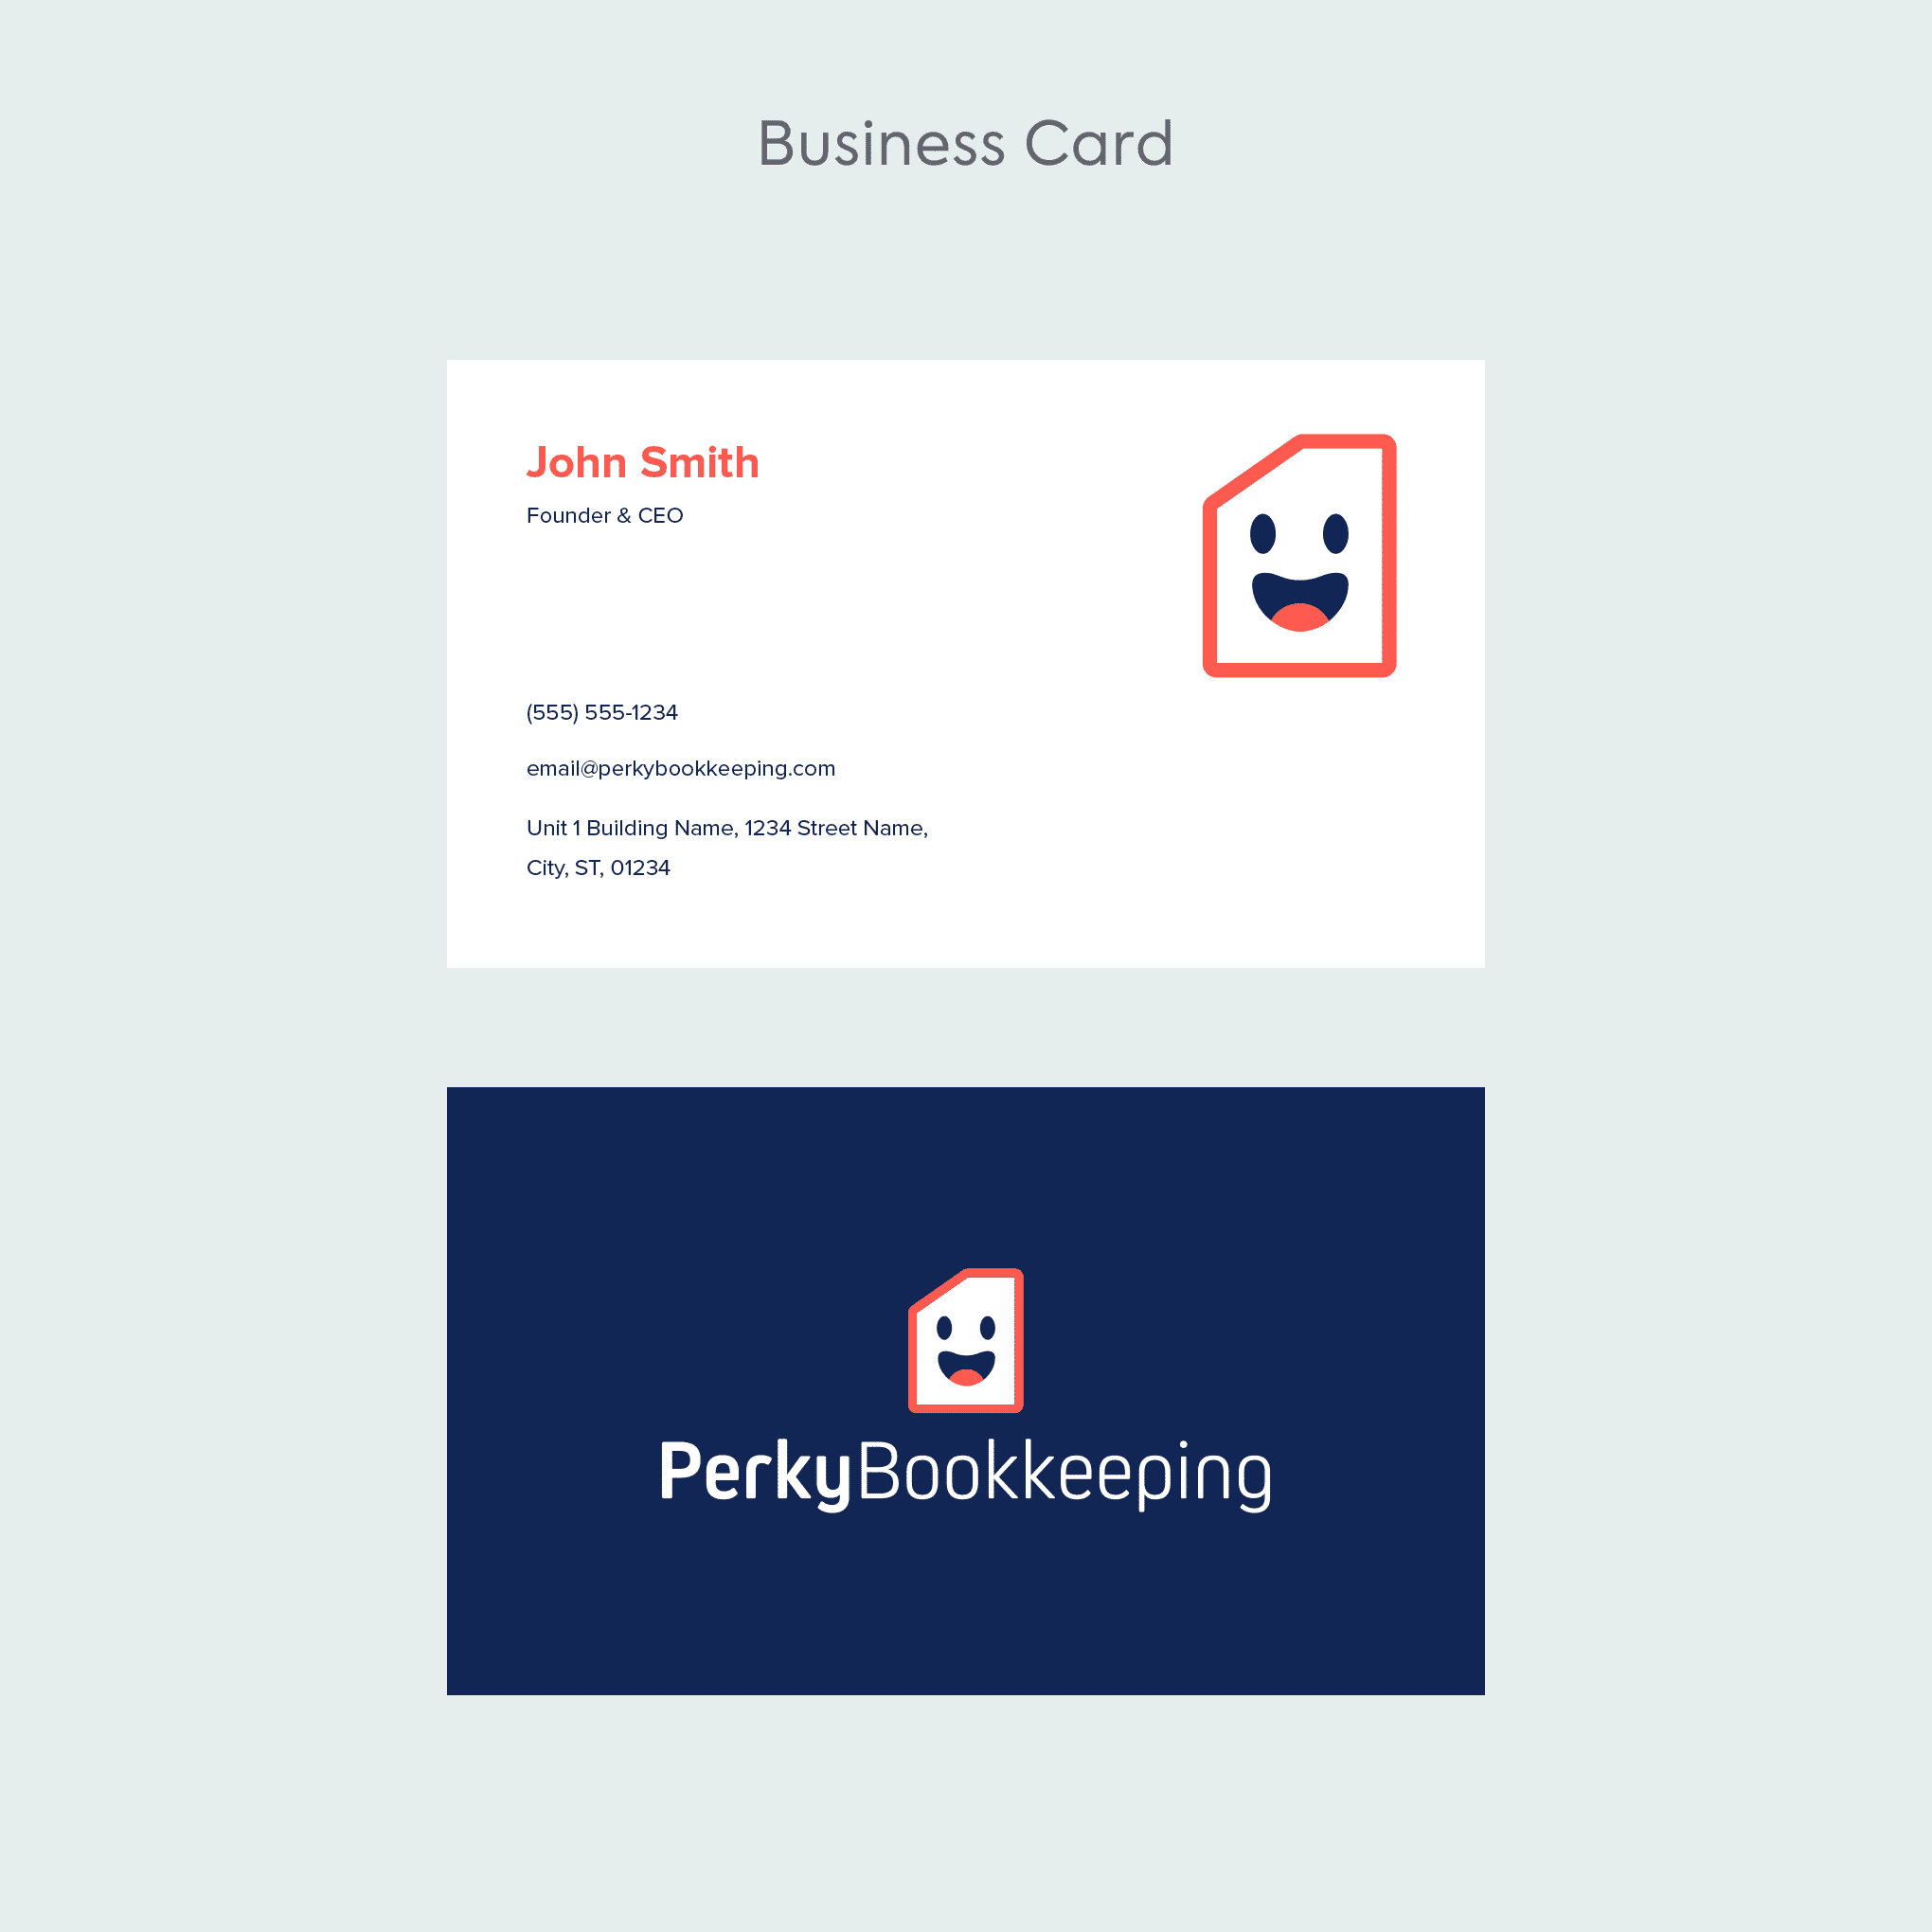 04 - Business Card Template (4)